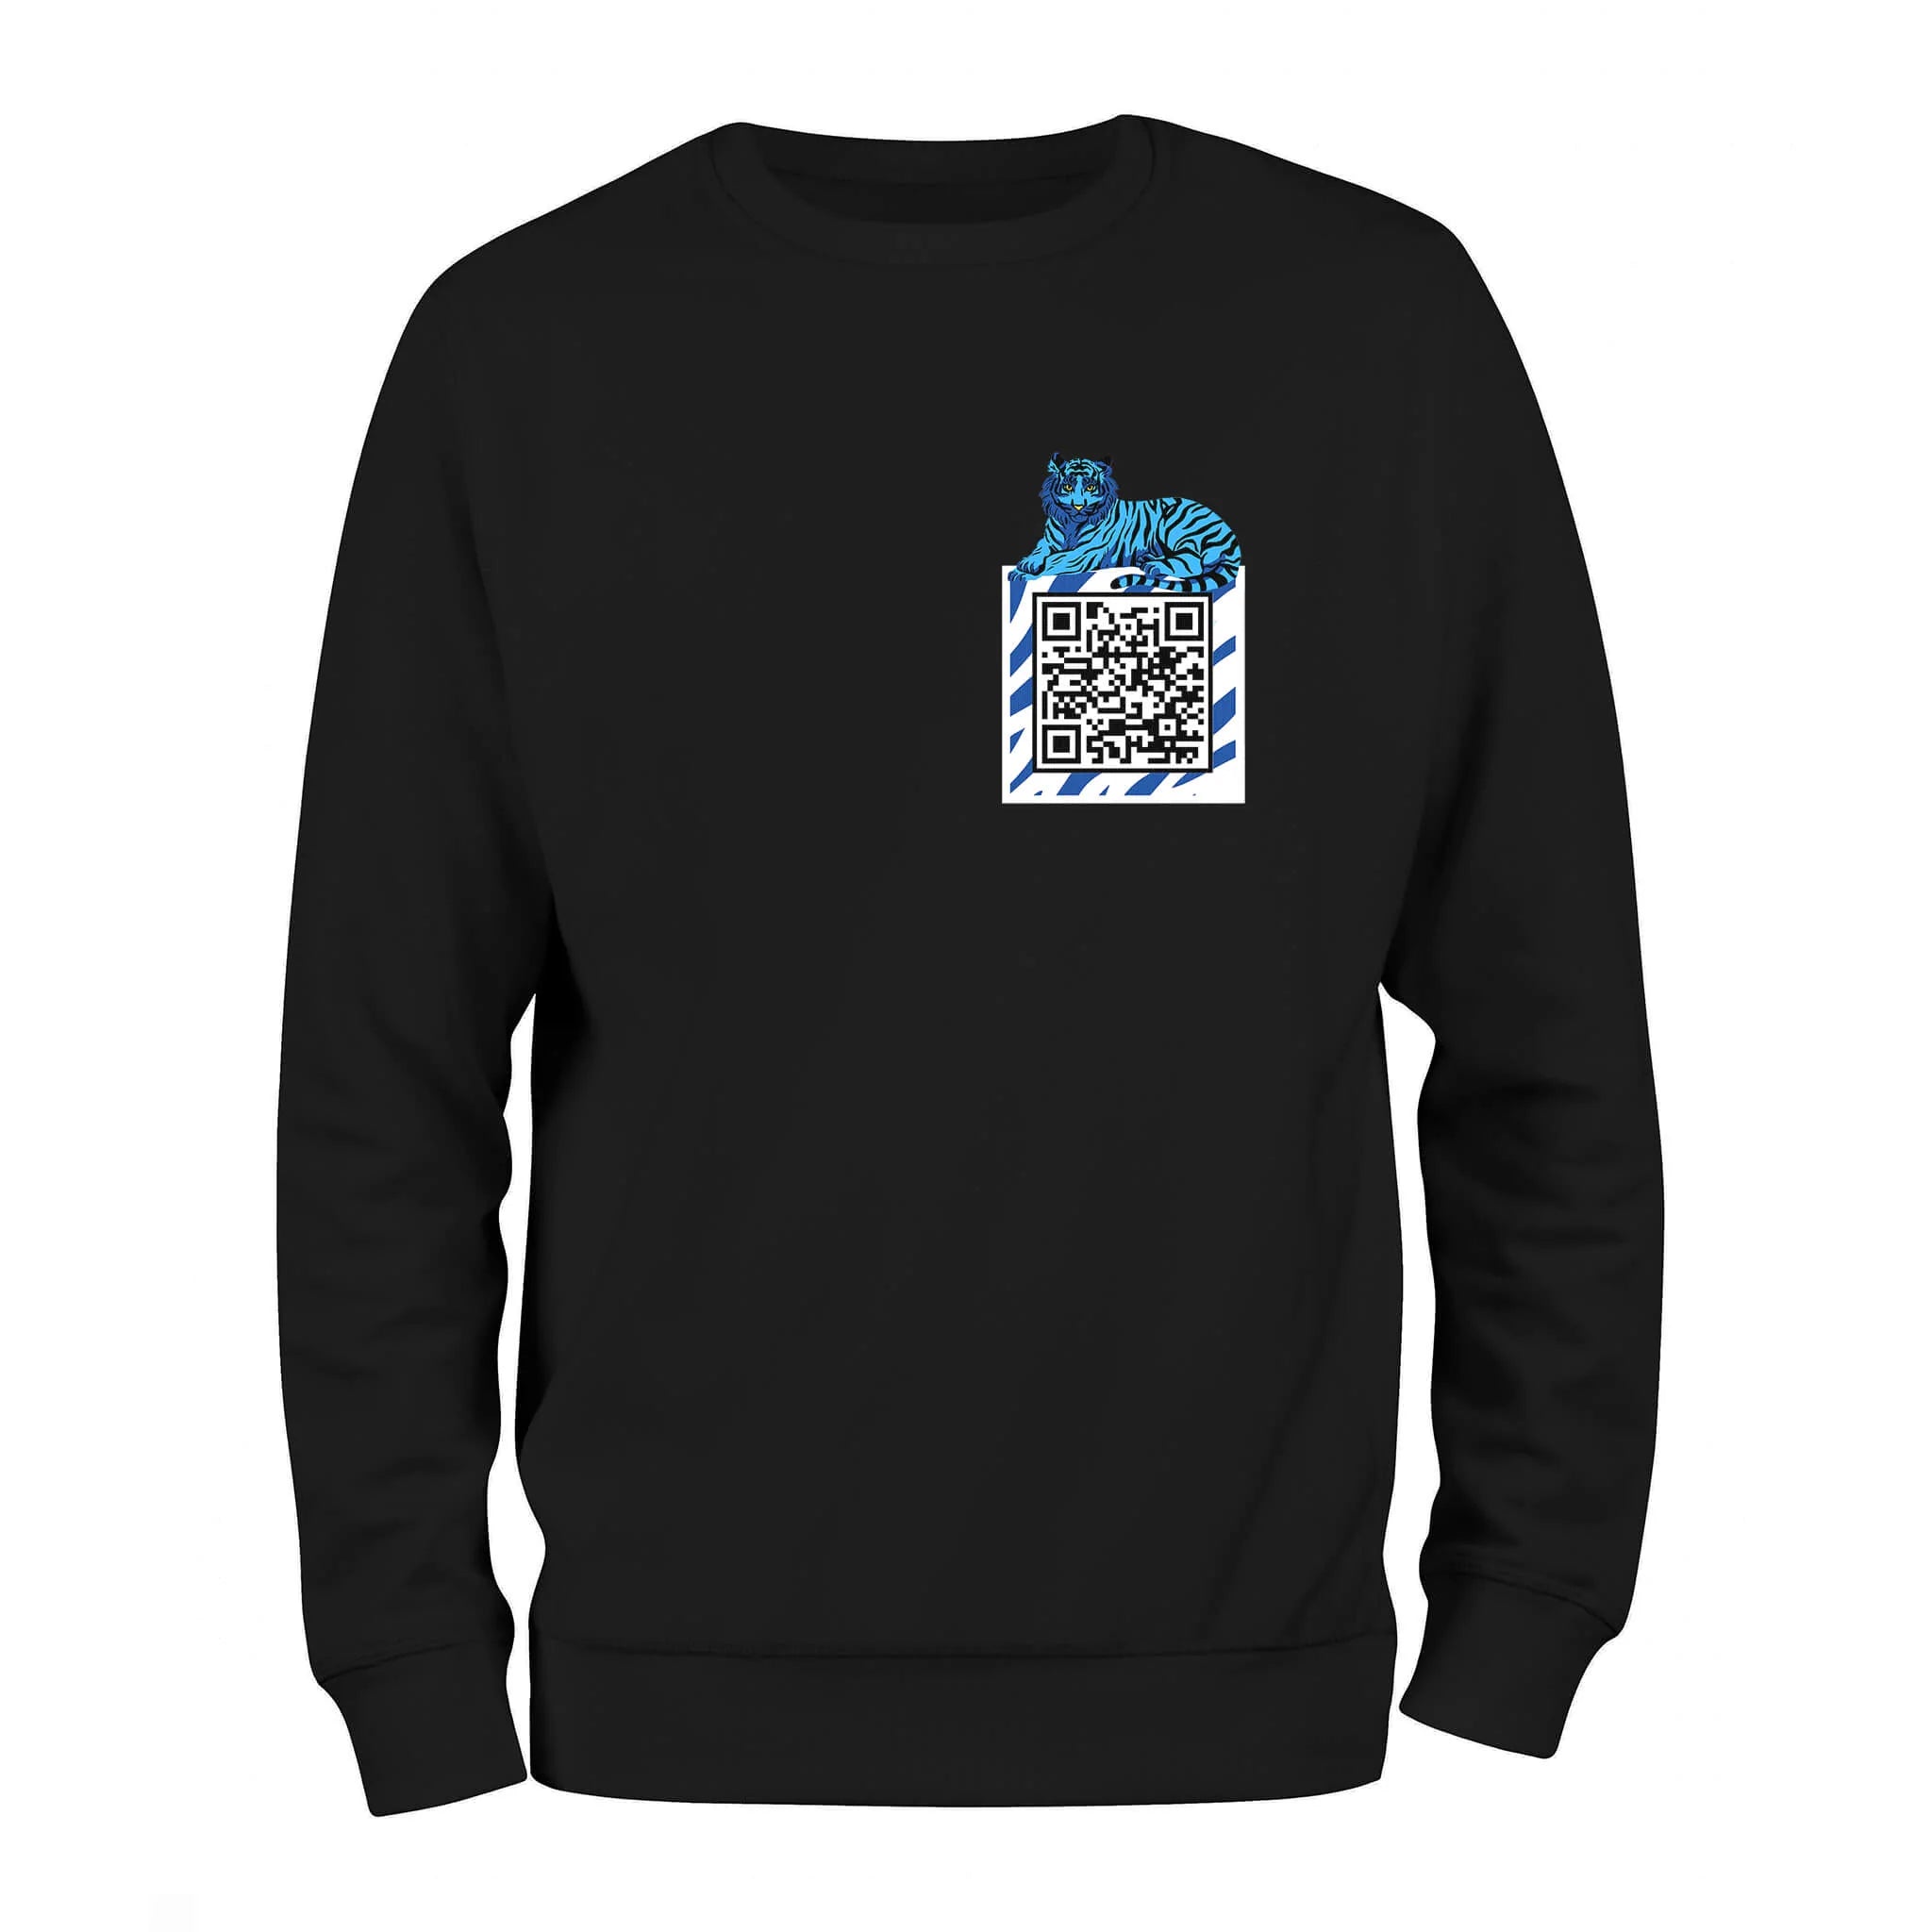 Black QR Sweatshirt from RESHRD Savannah collection with Front White & Navy Blue design